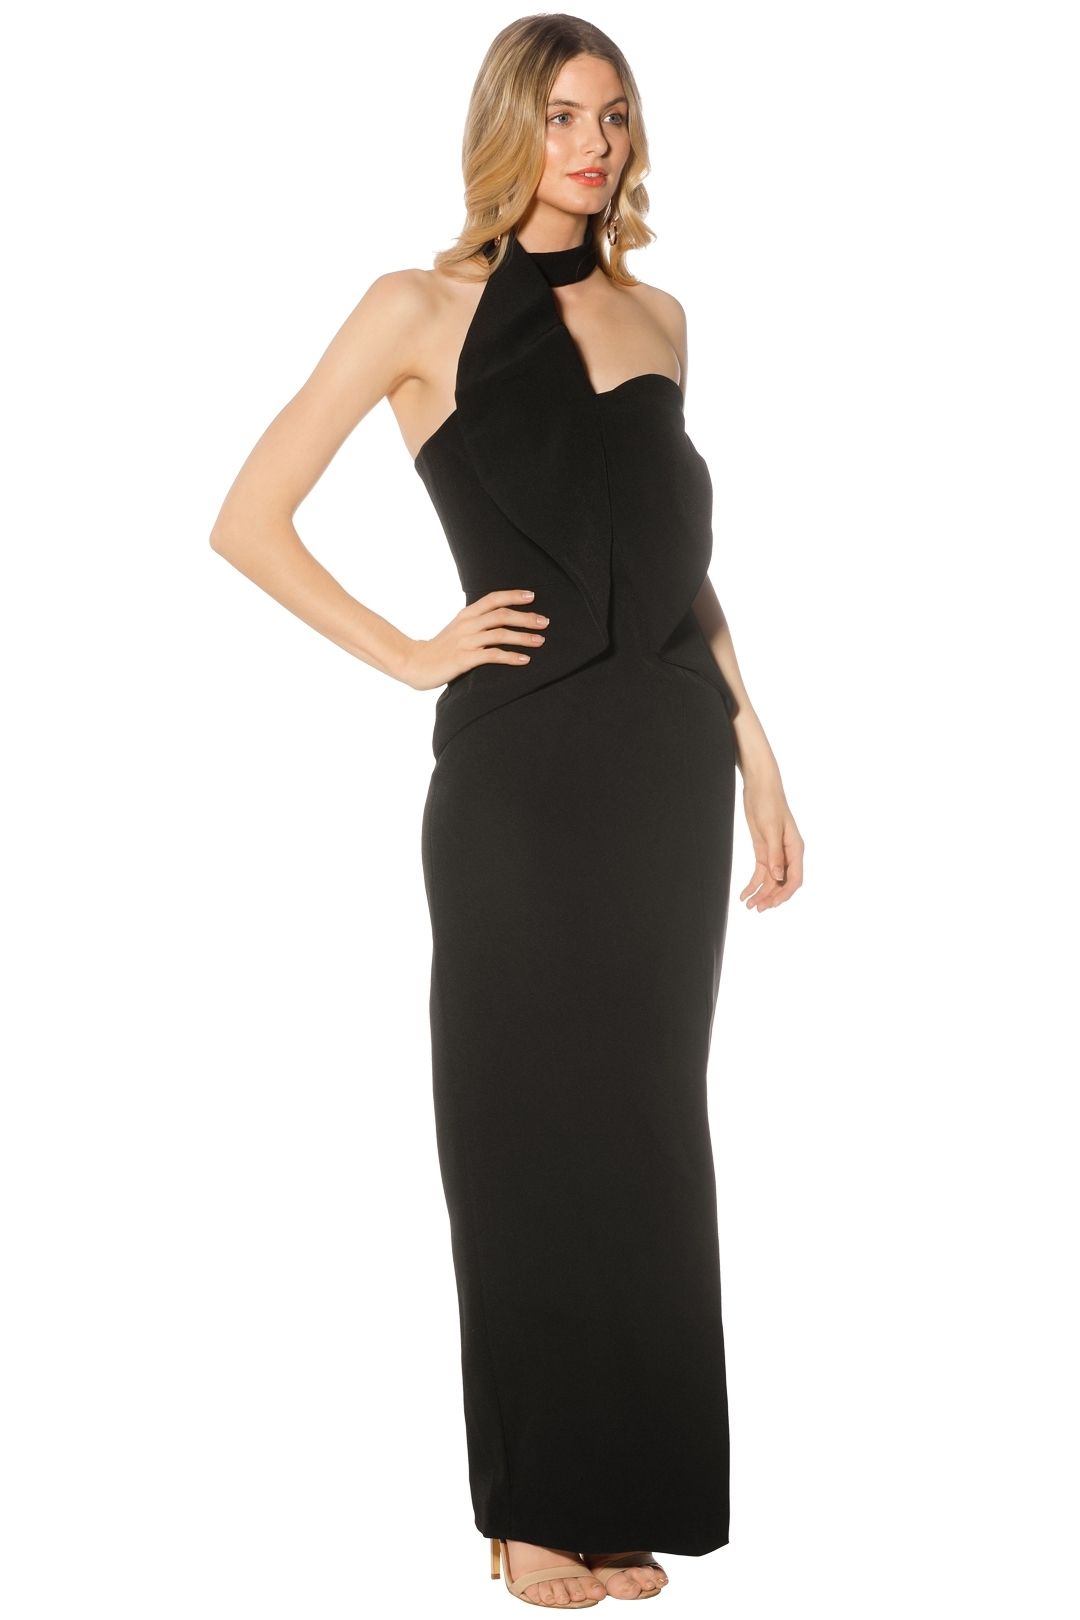 Keepsake The Label - Dance with me Gown - Black - Side